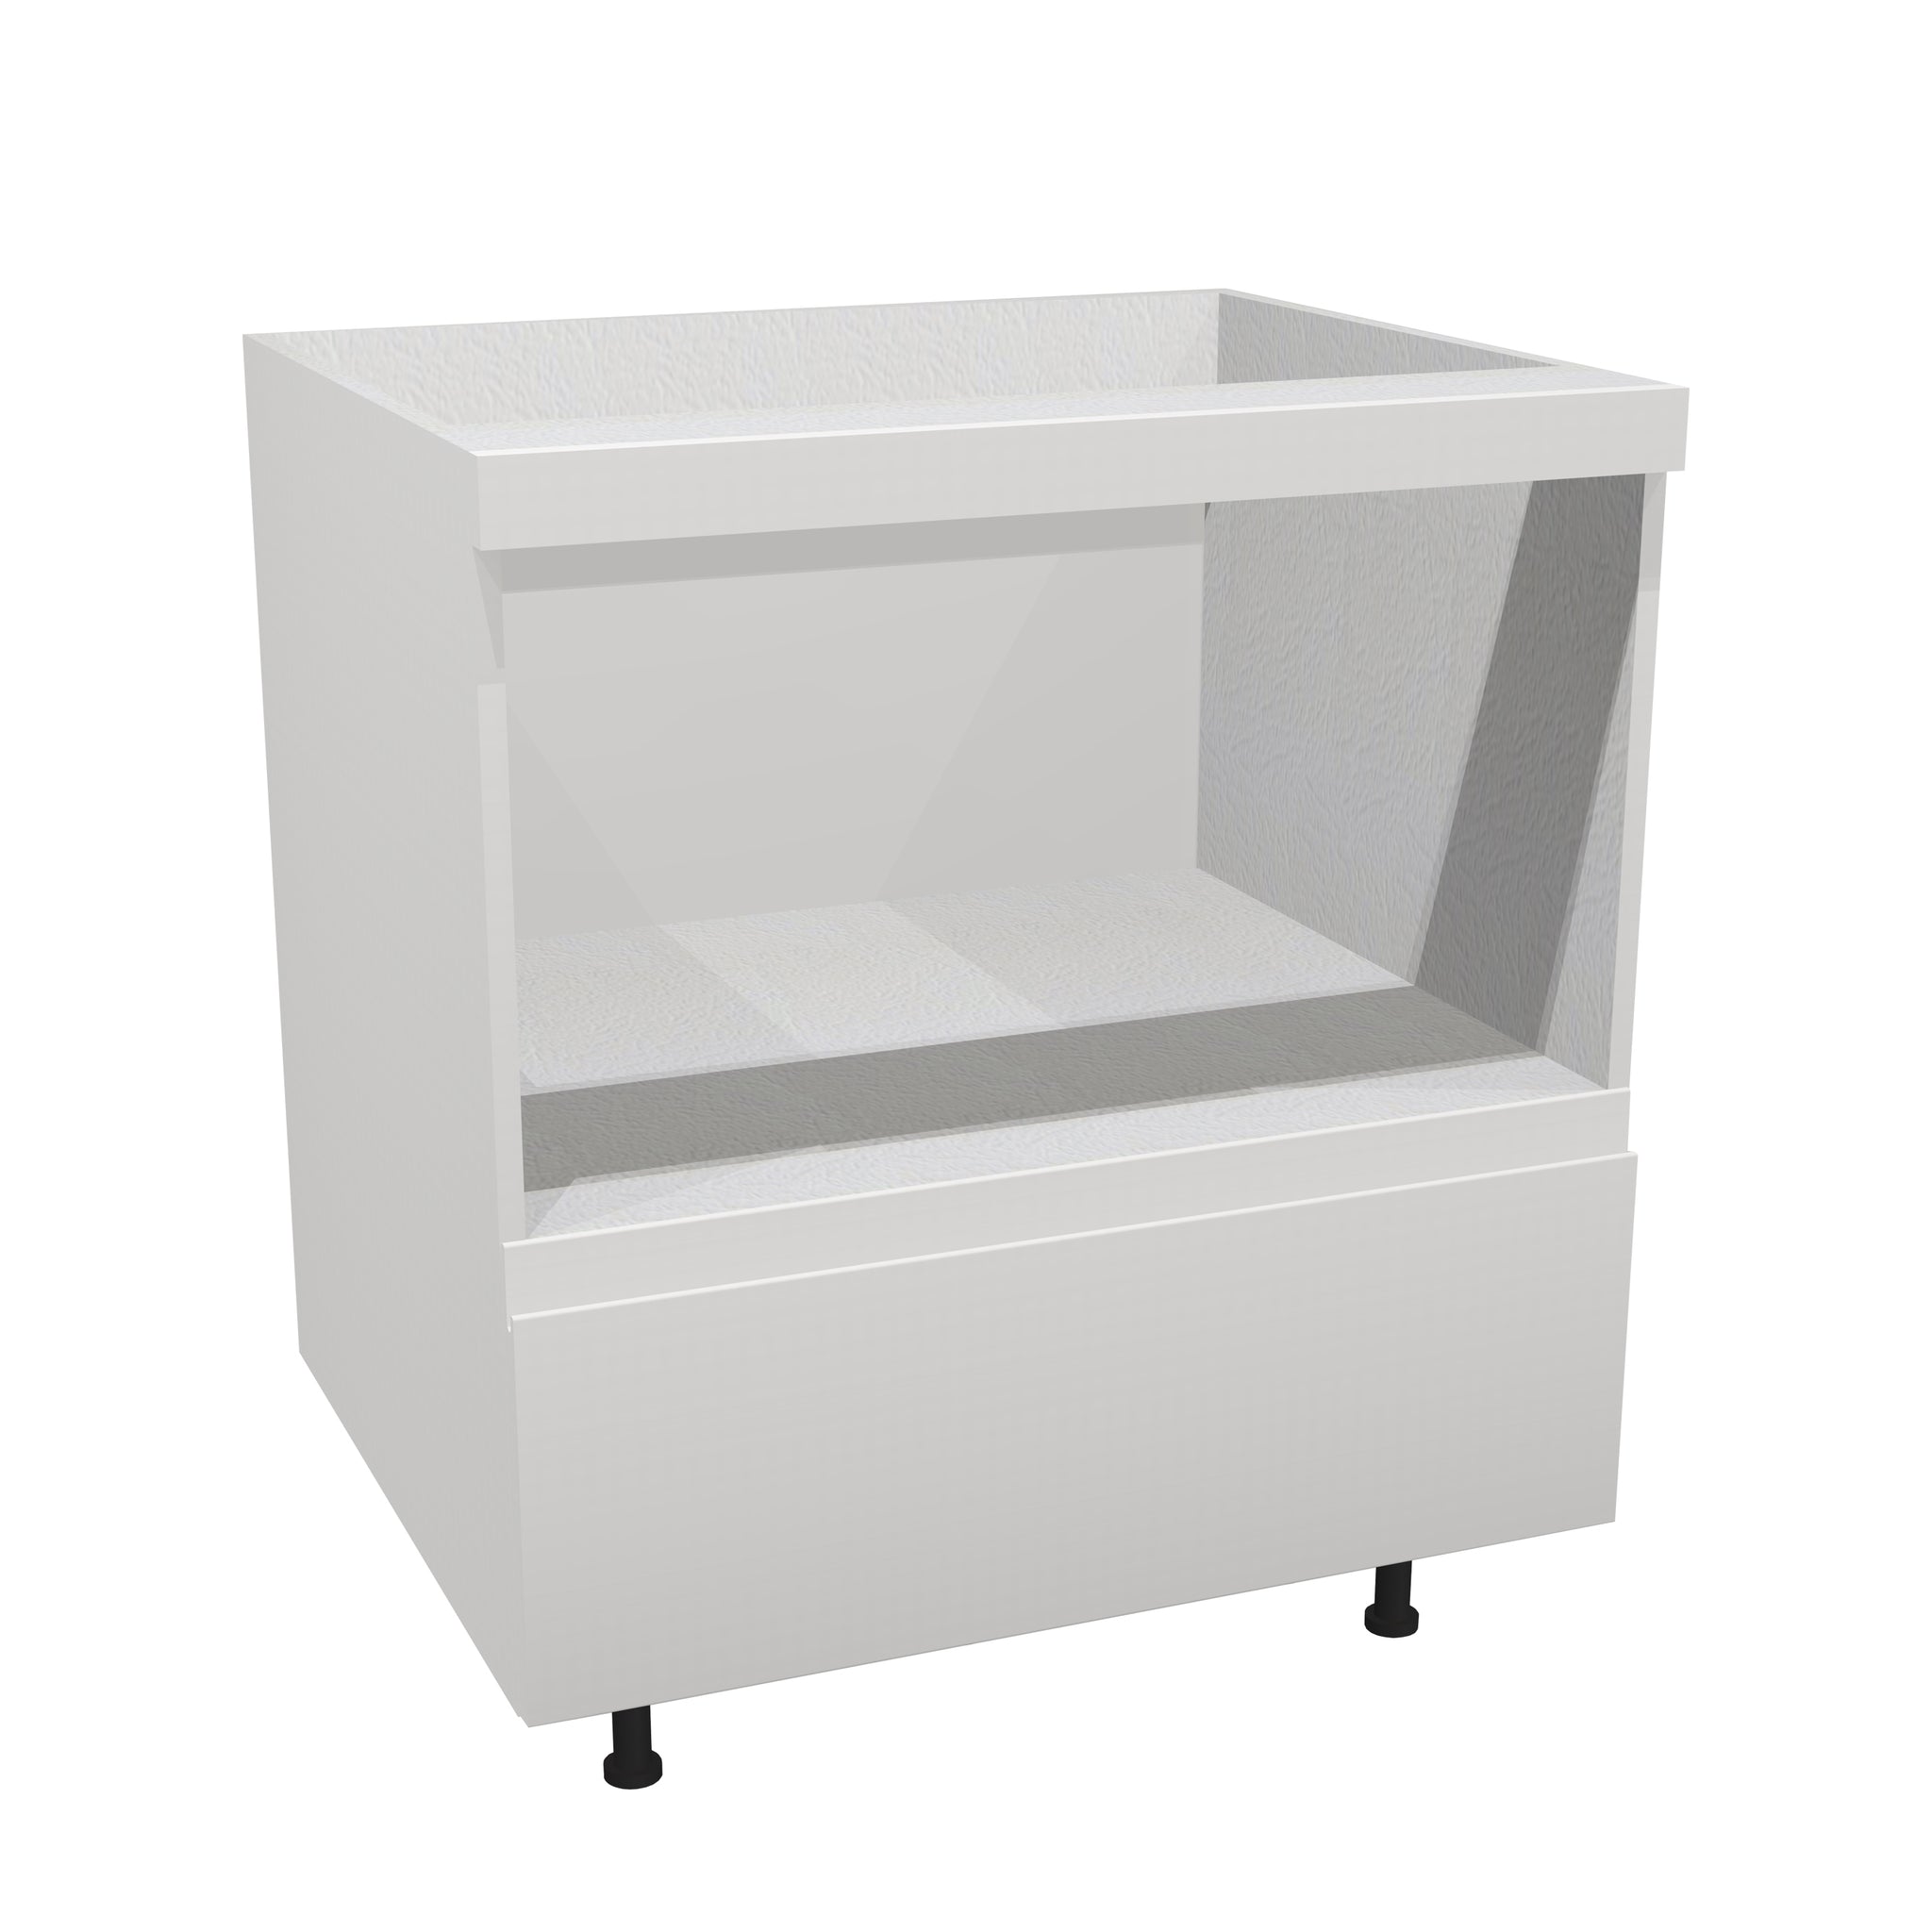 RTA - Lacquer White - Base Microwave Cabinet | 24"W x 30"H x 23.8"D